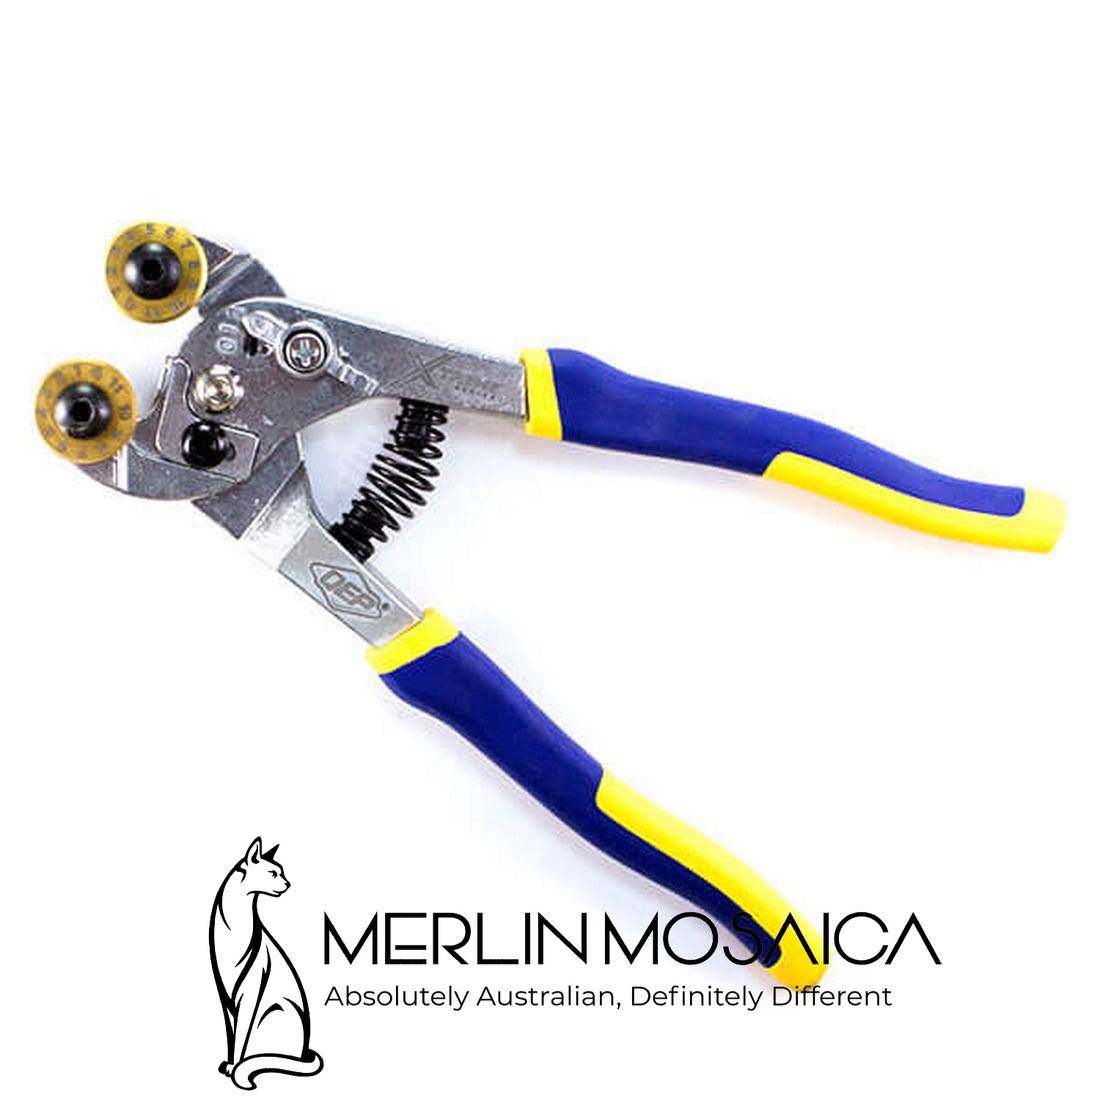 SeaBell Mosaic Tools – Wheeled Glass Nippers – UPGRADED - Merlin Mosaica